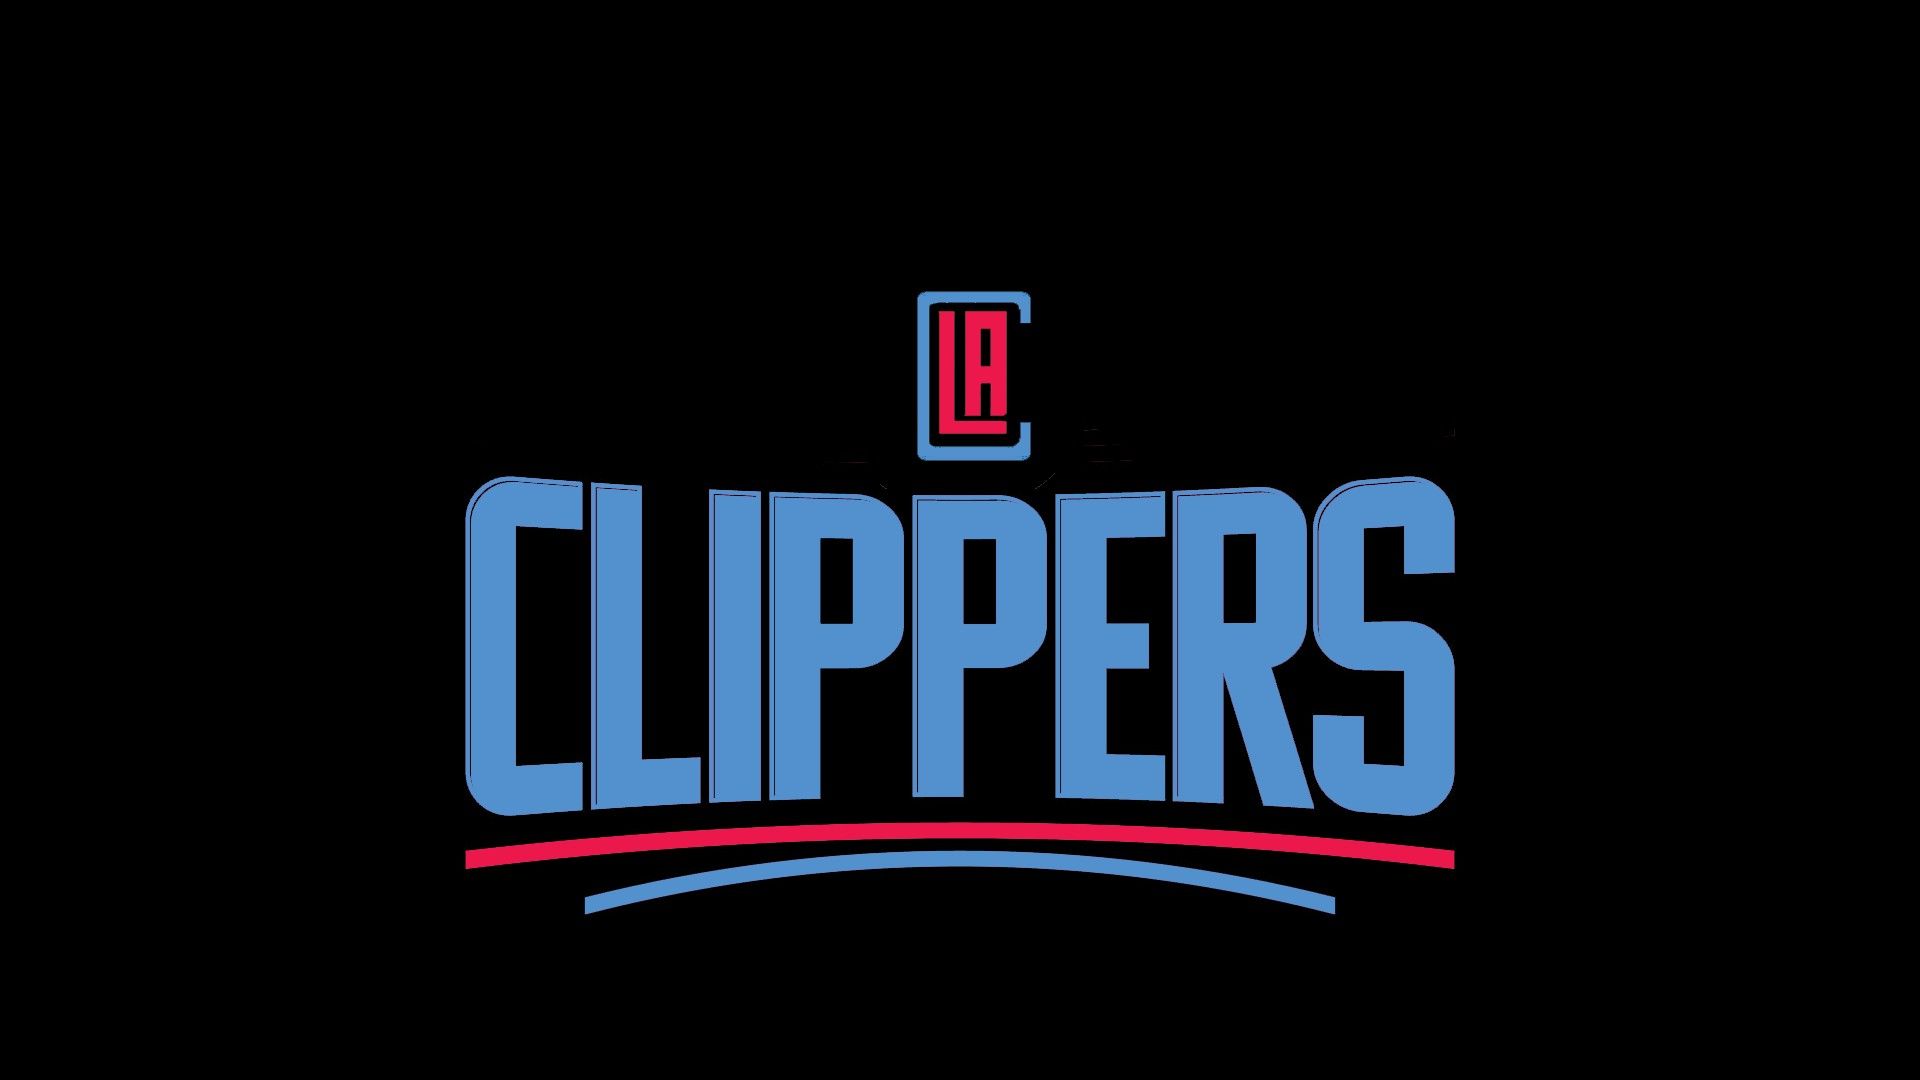 Los angeles clippers 1080P, 2K, 4K, 5K HD wallpapers free download